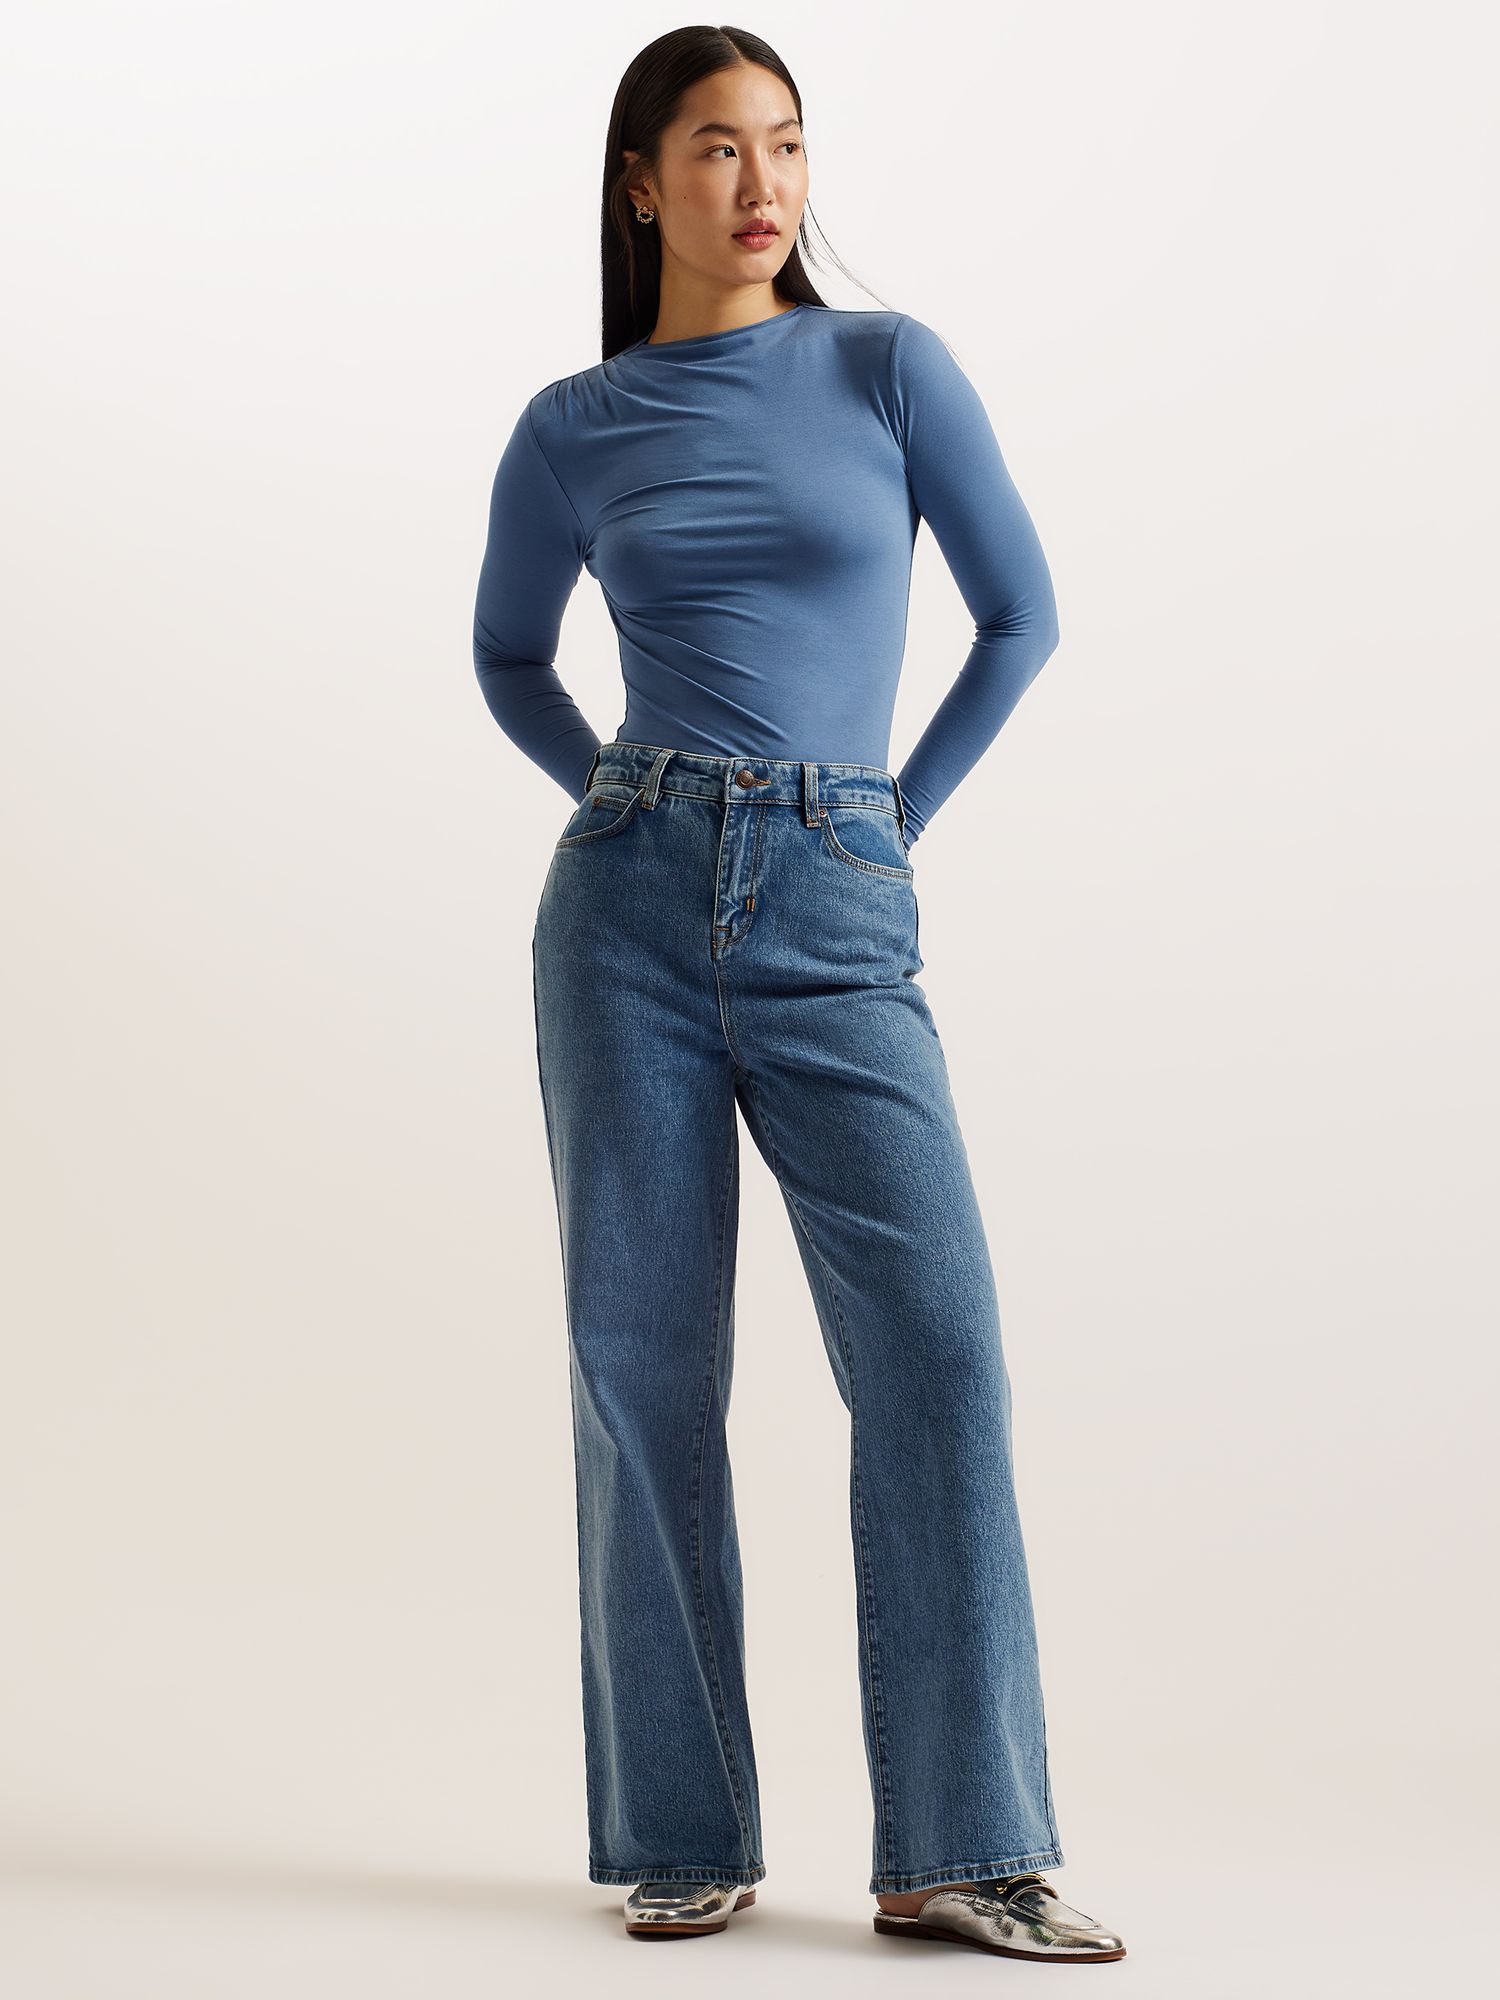 Ted Baker Nass Wide Leg Jeans, Mid Blue, 25R